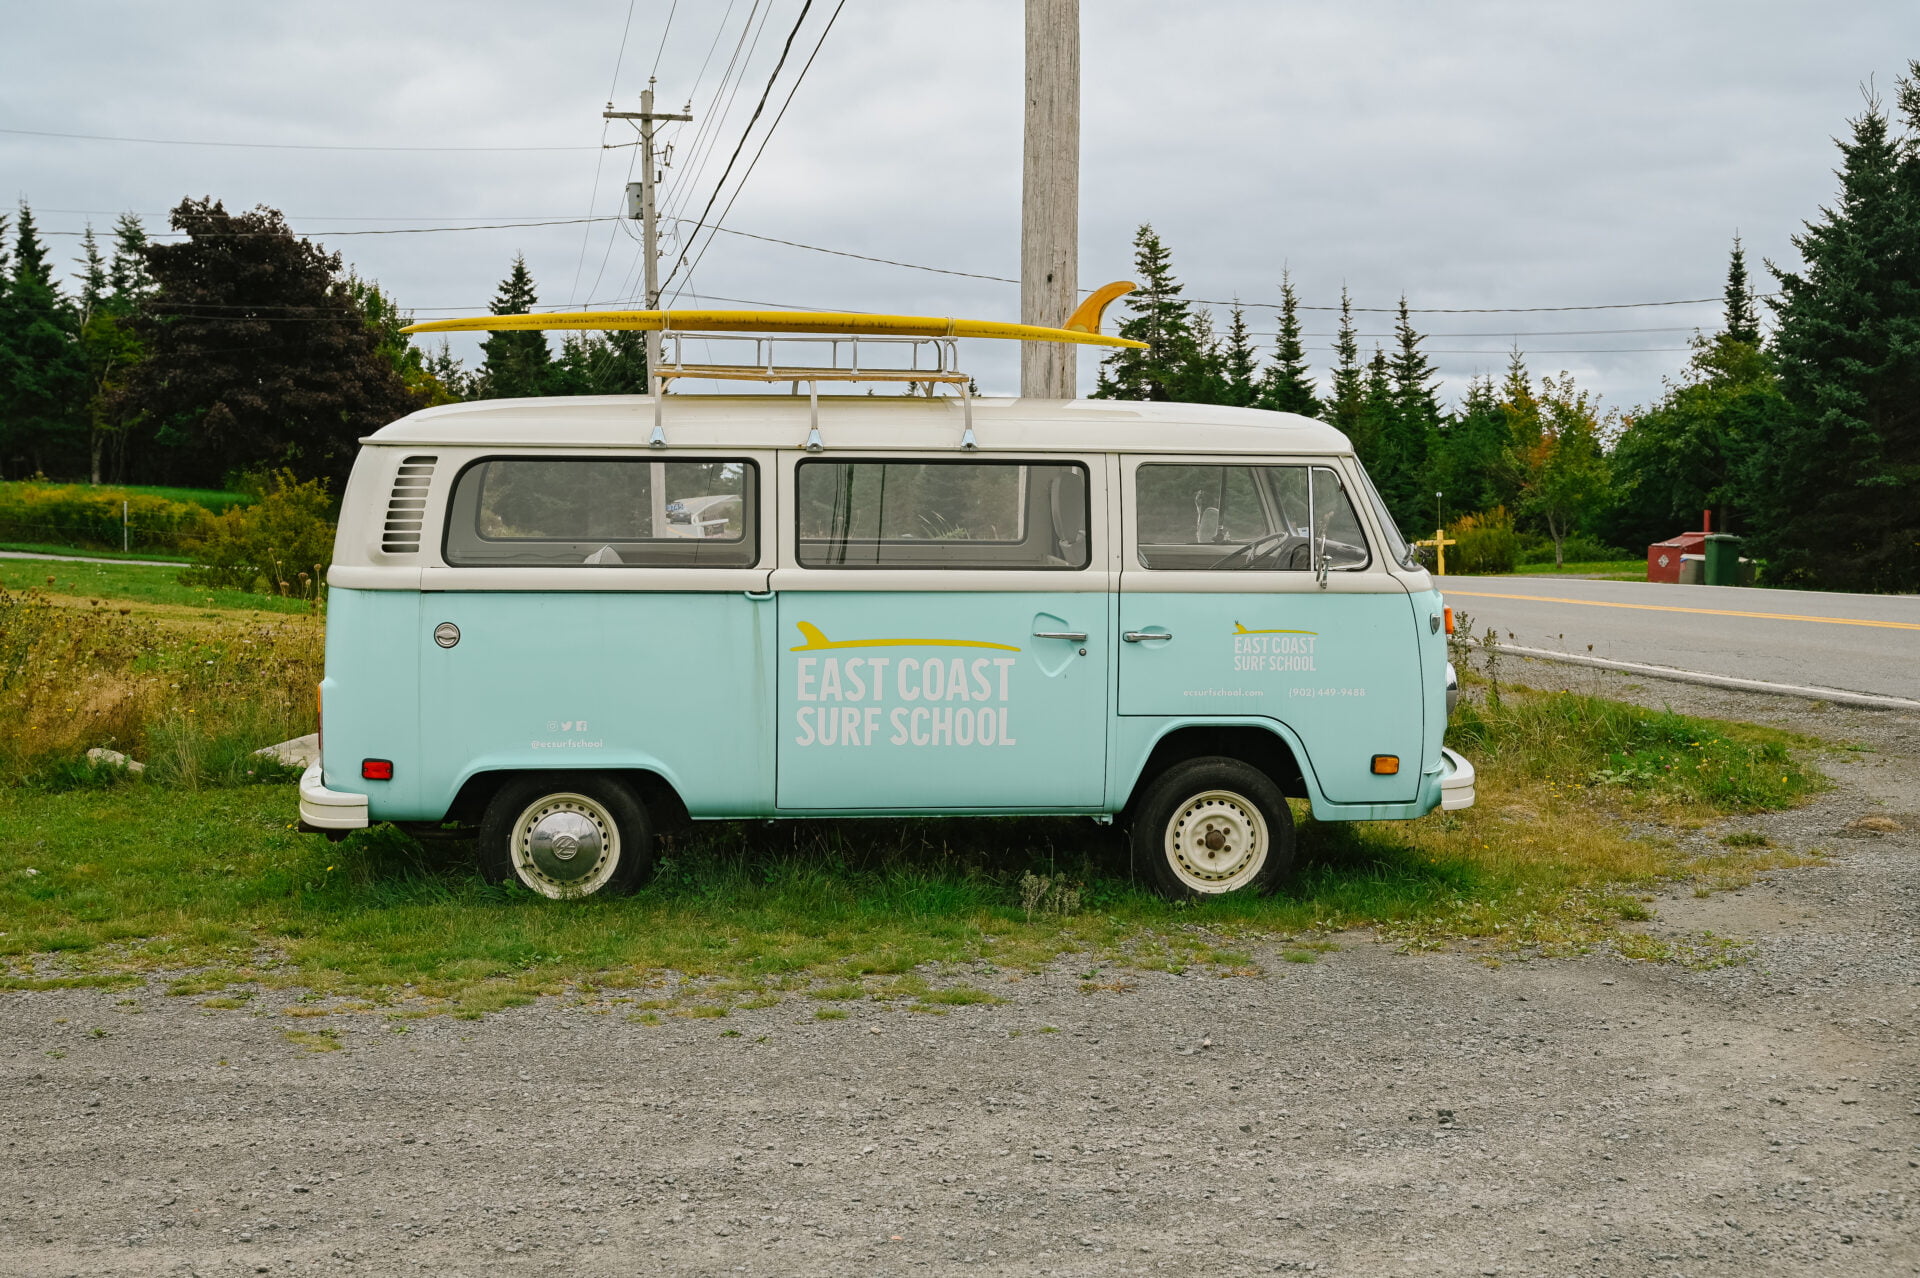 teal VW van with surf school logo on side sitting outside the lawrencetown surf shop